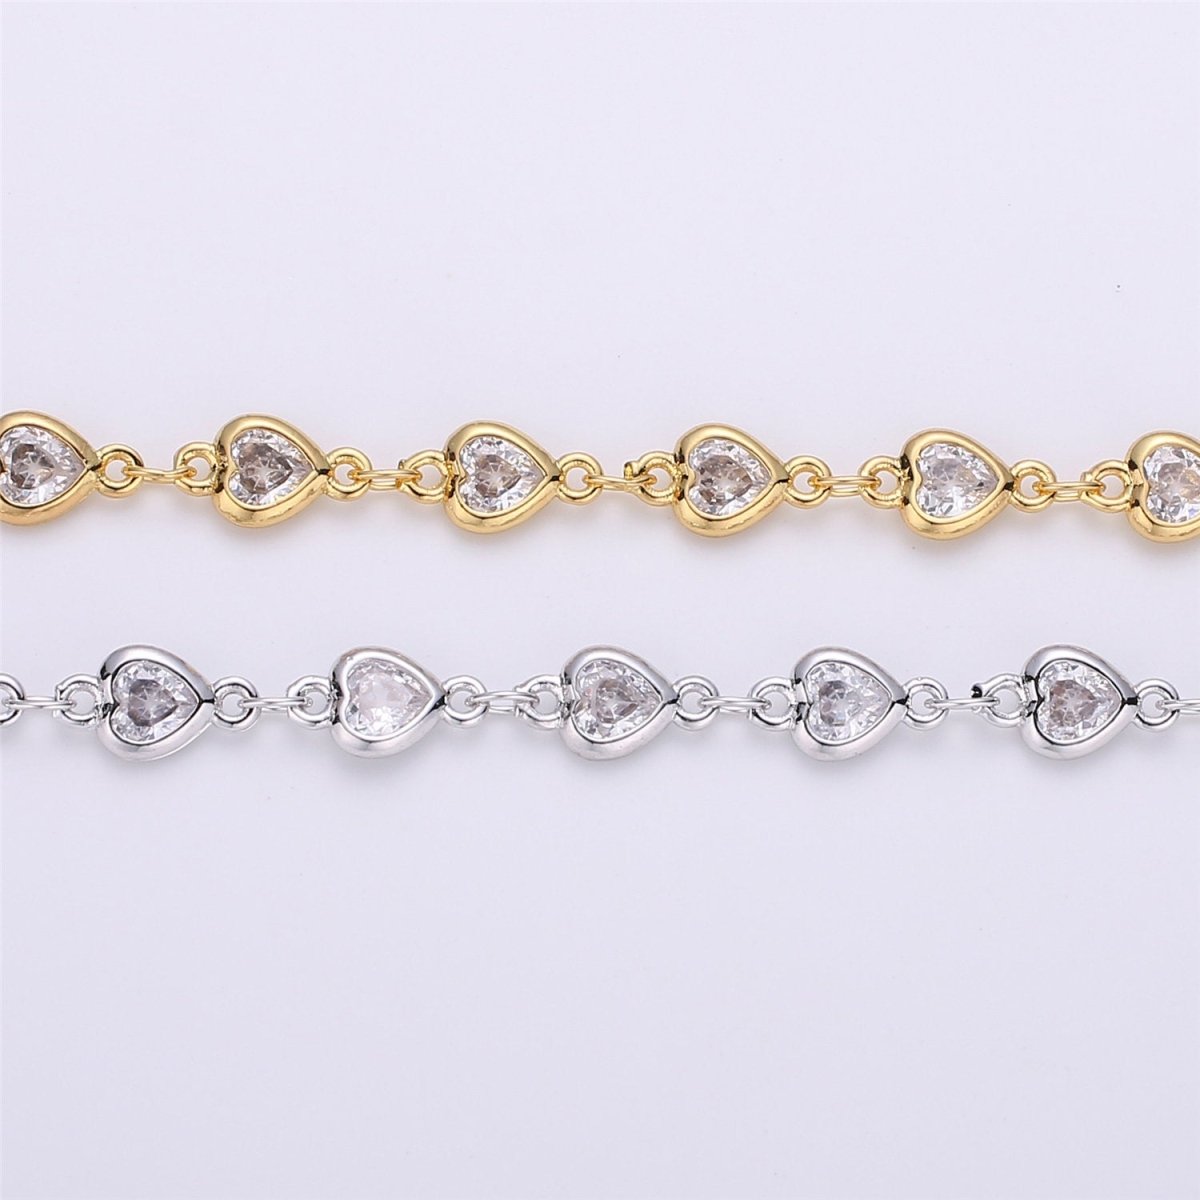 24K Gold Filled Chain Heart CZ Chain by Yard, Bulk Chain By Yard, Cubic Chains, Tiny CZ Chains, Ideal for Lariat Necklace Long Necklace, White Gold Filled, DESIGNED Chain | ROLL-117, ROLL-118 Clearance Pricing - DLUXCA